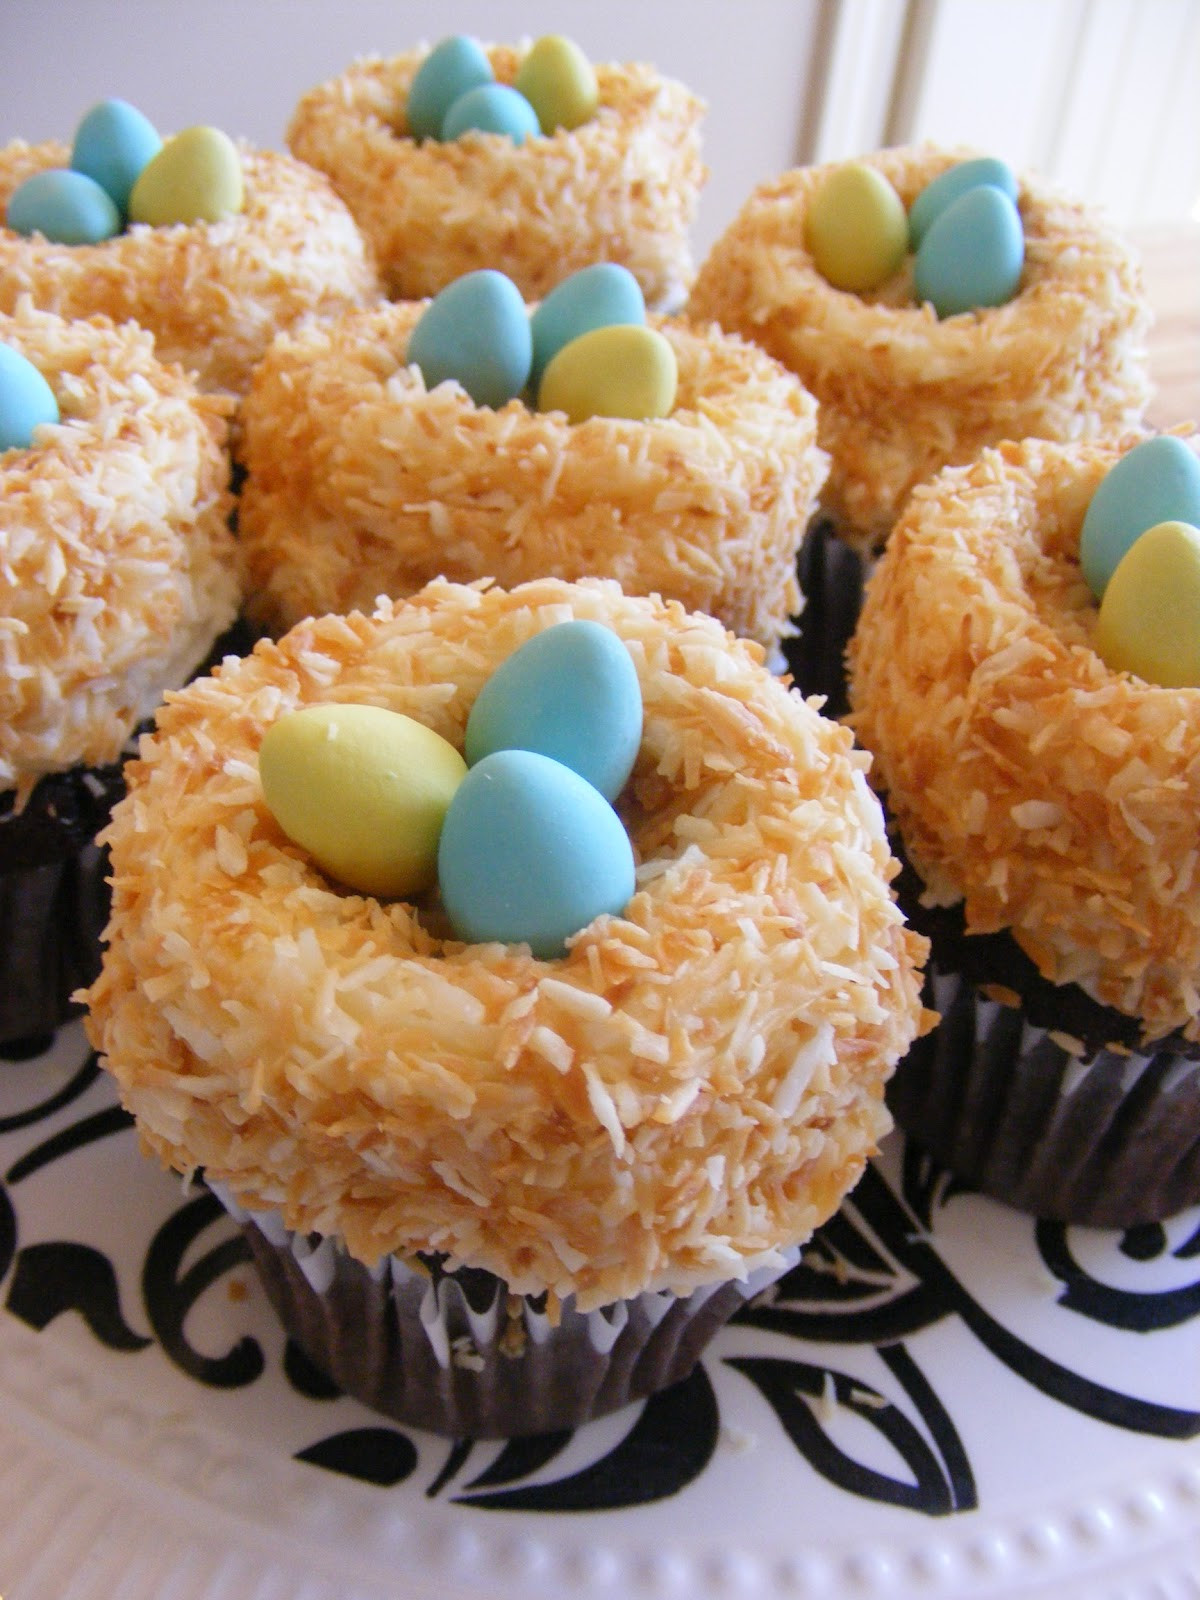 Cute Easter Cupcakes
 Two Super Easy Super Cute Cupcakes for Easter